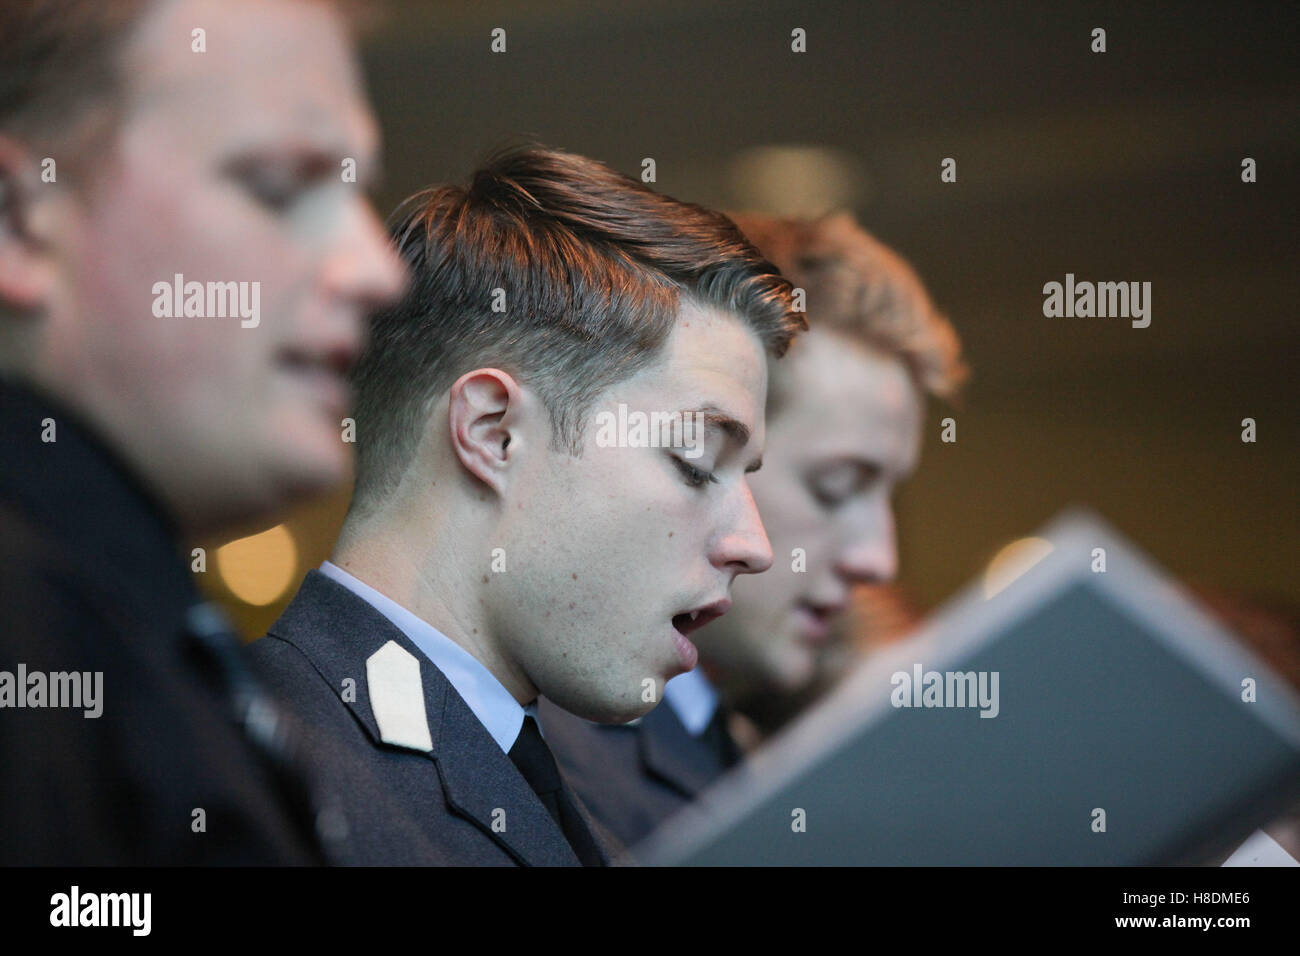 City Hall, London 11 Nov 2016 The Mayor of London, Sadiq Khan, Chairman of the London Assembly, Tony Arbour, London Assembly Members, Greater London Authority staff and representatives from key London government organisations  commemorates those who served and lost their lives in the two world wars and other conflicts at City Hall. Credit:  Dinendra Haria/Alamy Live News Stock Photo